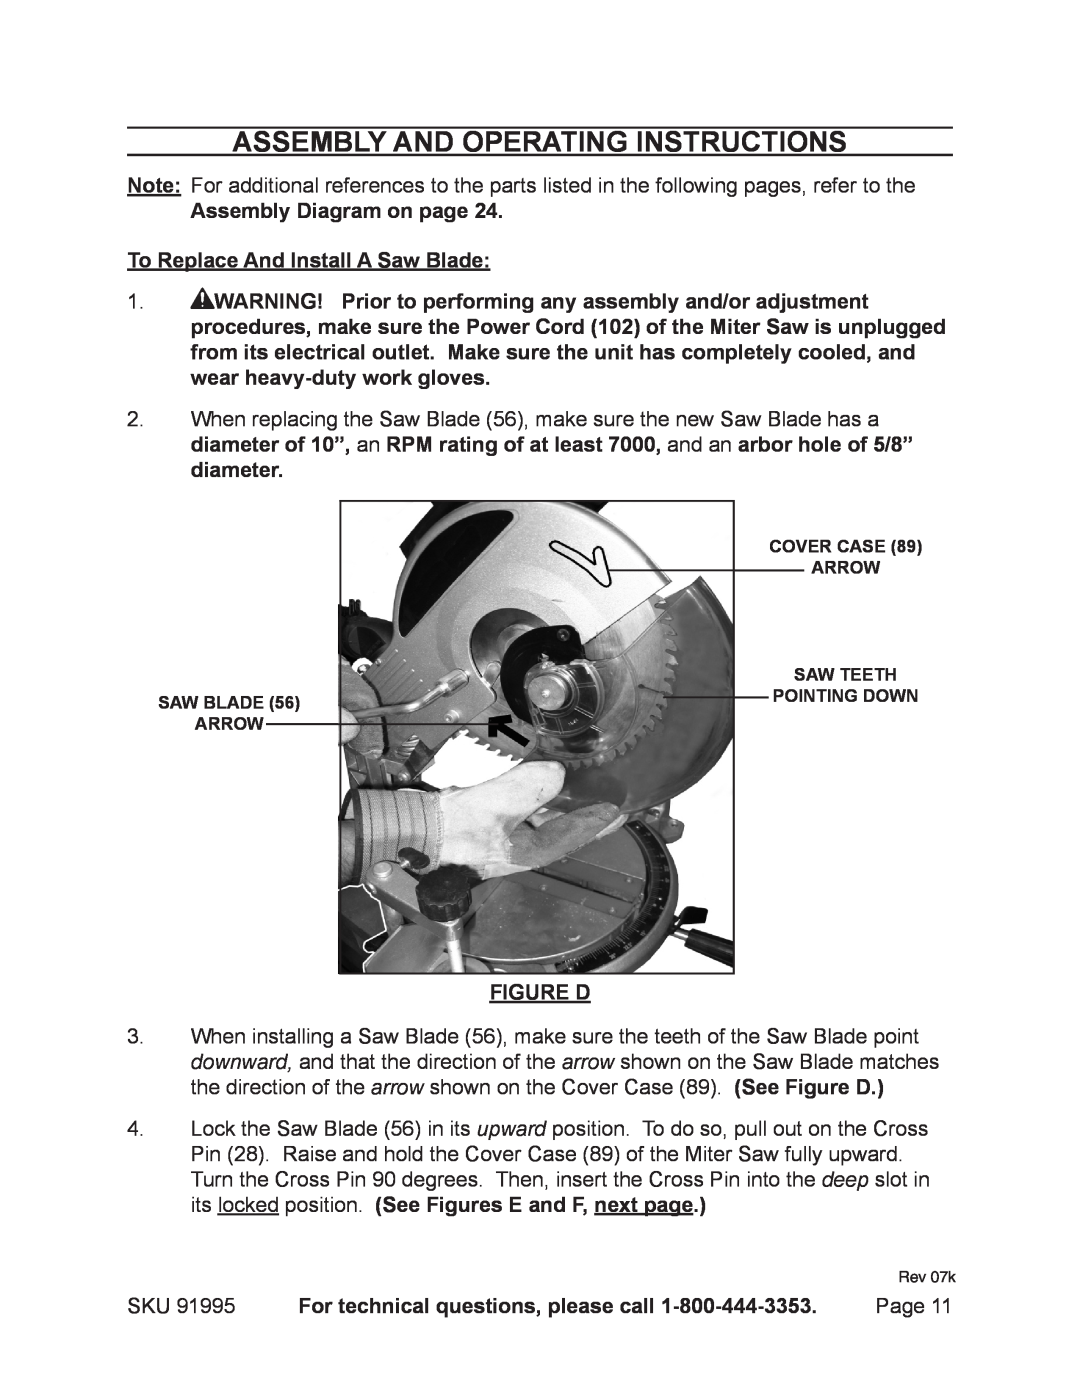 Chicago Electric 91995 Assembly And Operating Instructions, Assembly Diagram on page, To Replace And Install A Saw Blade 